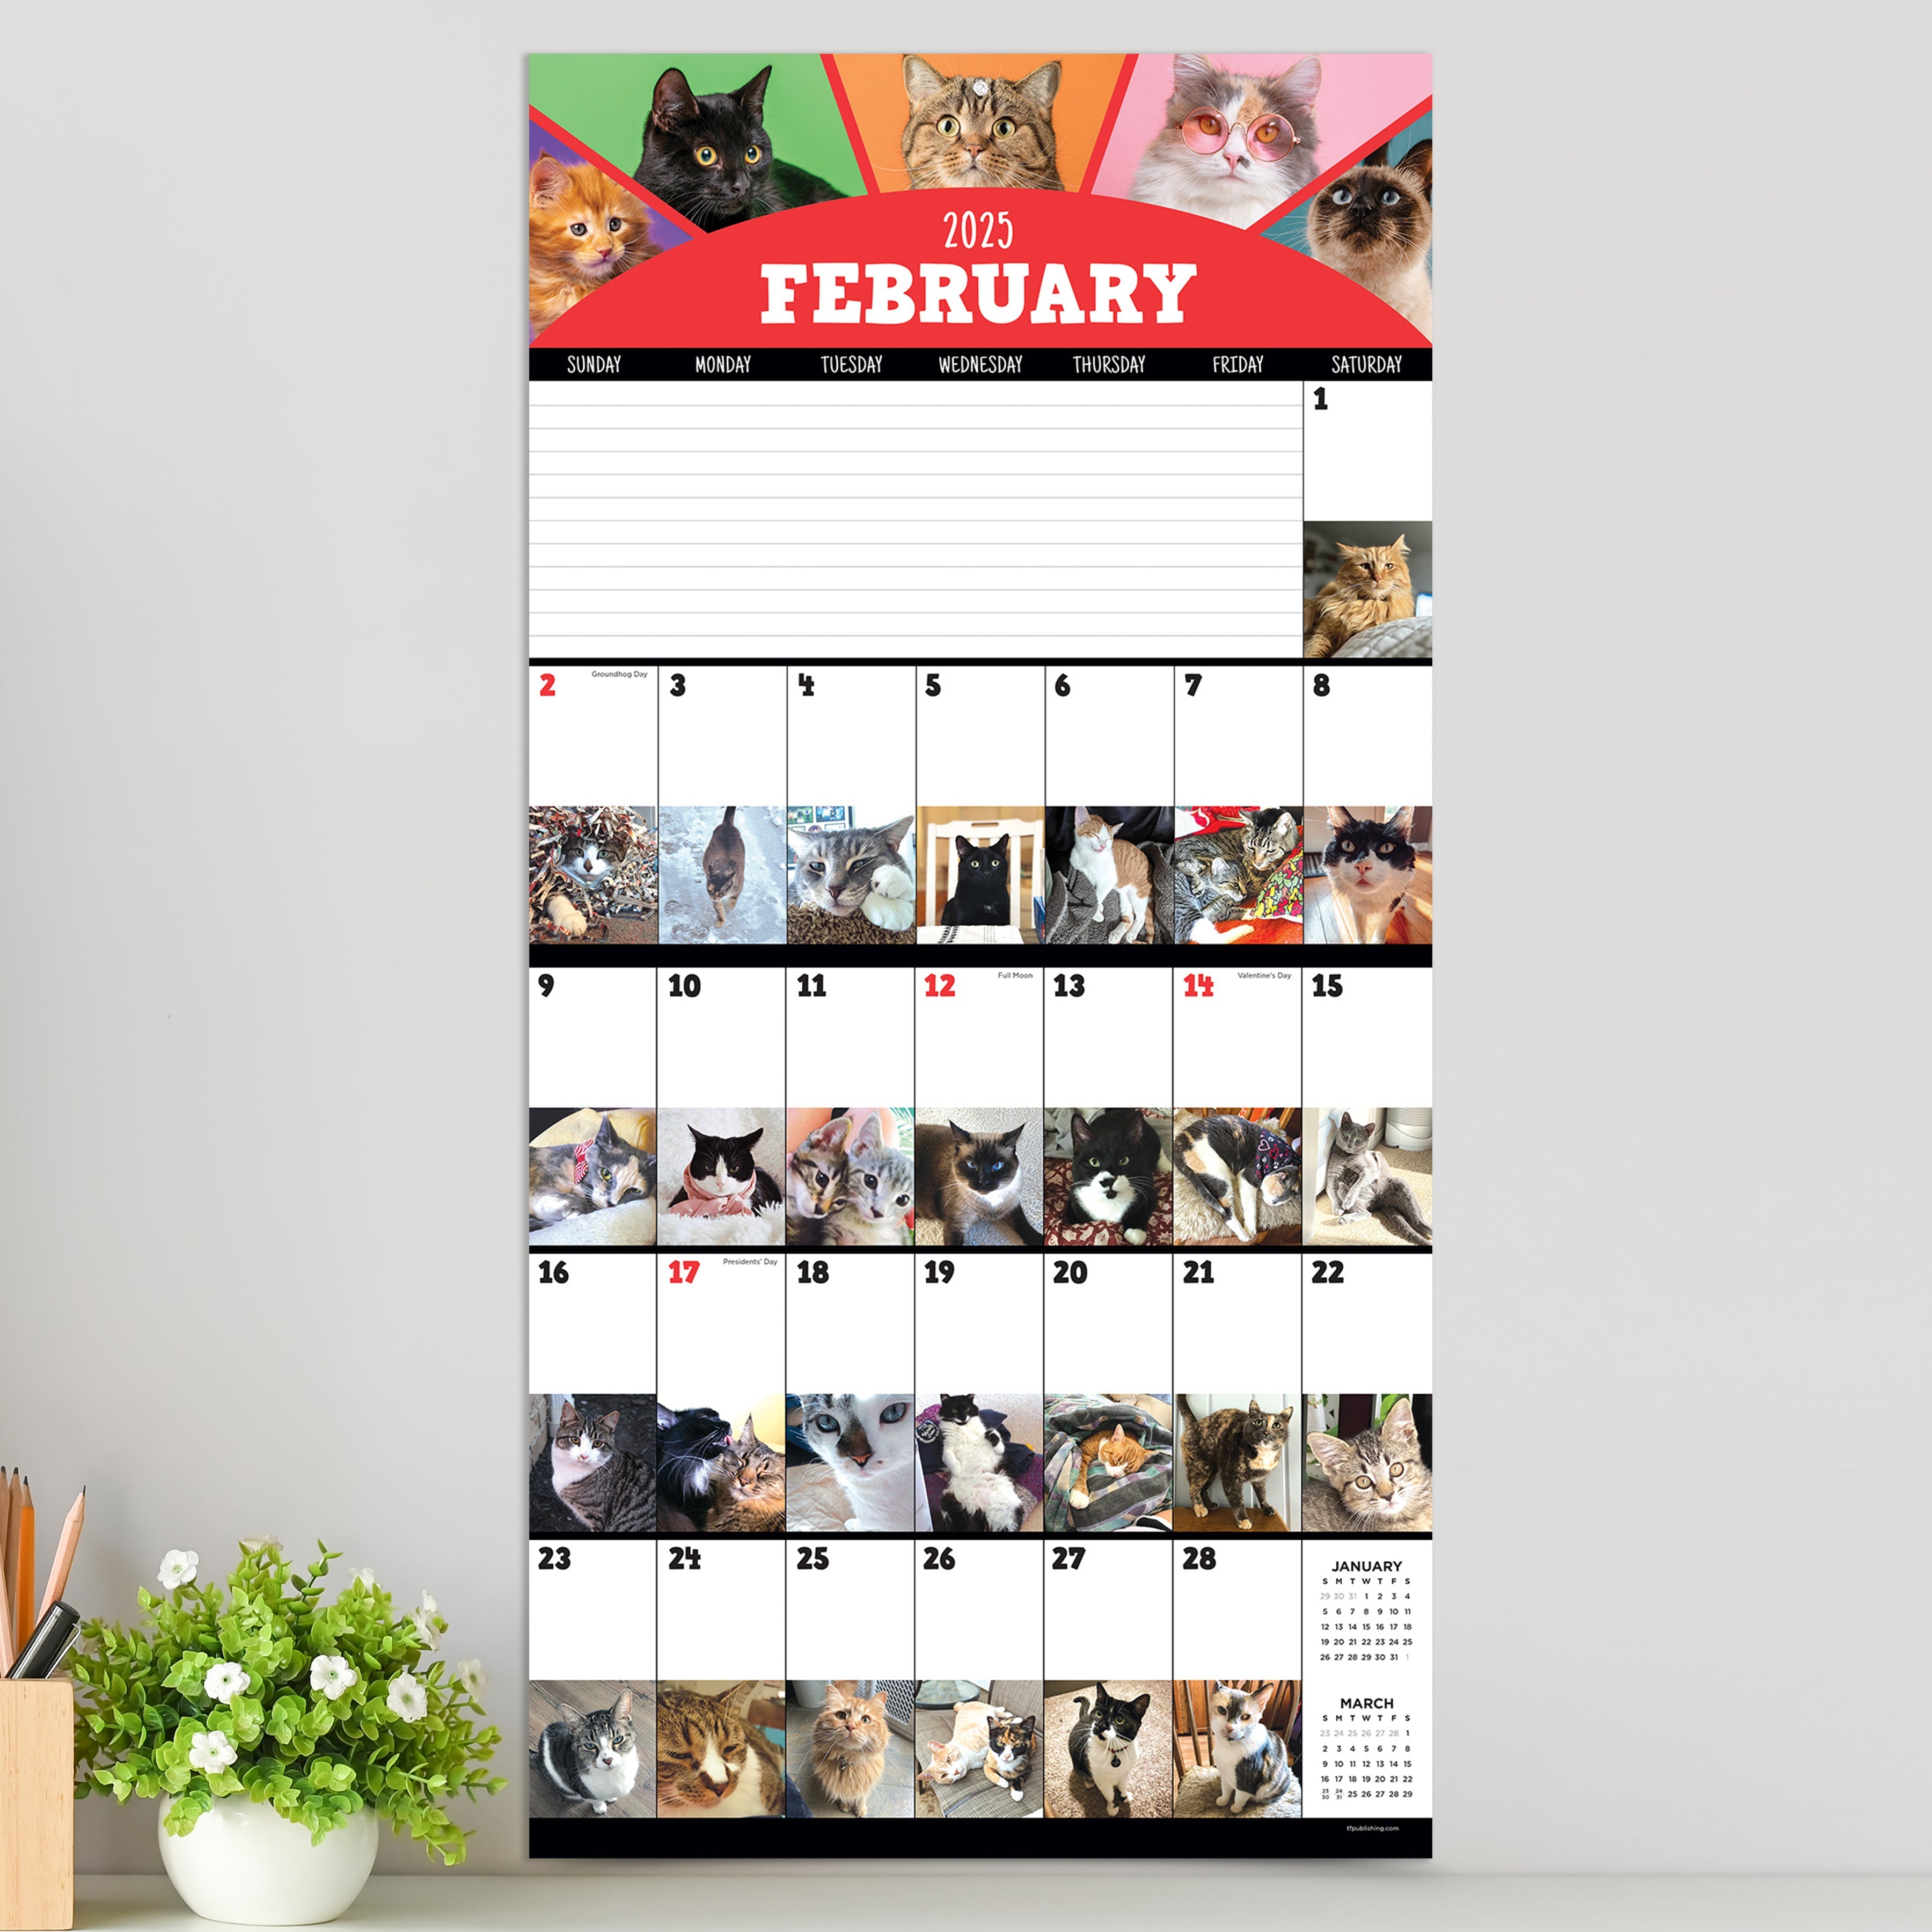 2025 Cat-A-Day - Square Wall Calendar